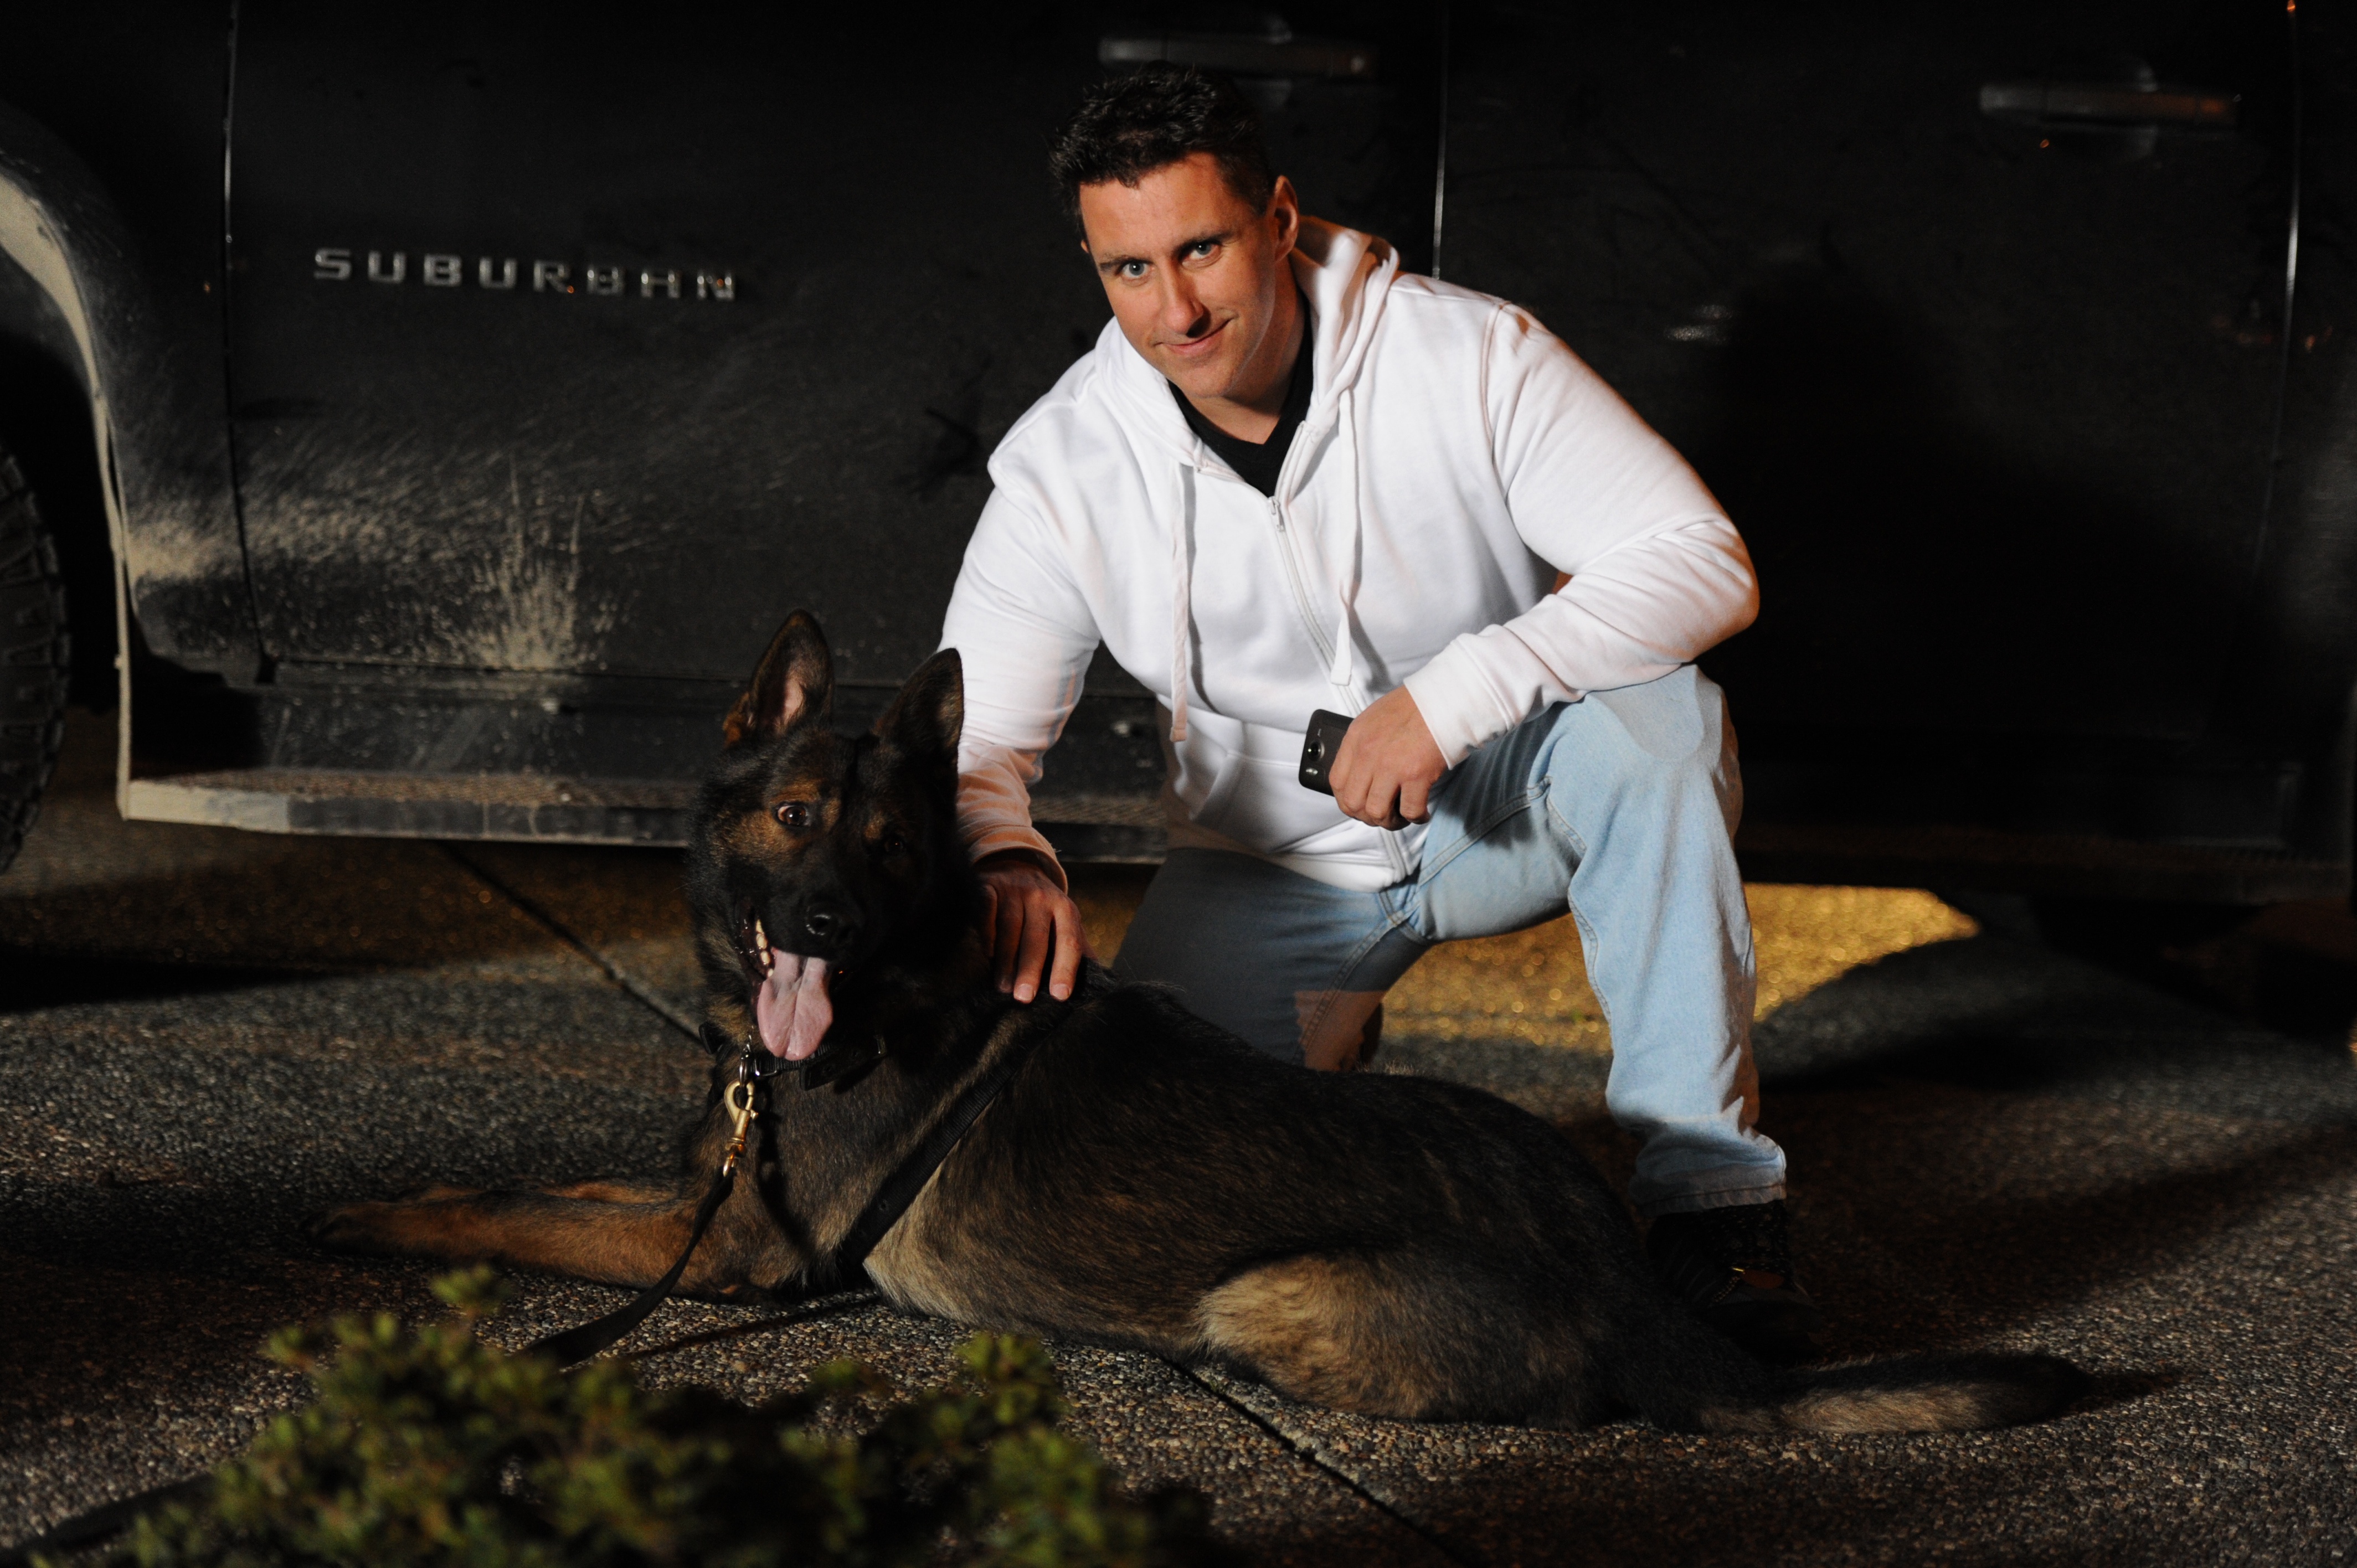 On-set - Suicide - Actor Martin Thomson & Police K-9 Officer Terro take time ot to catch breath and share a photo...